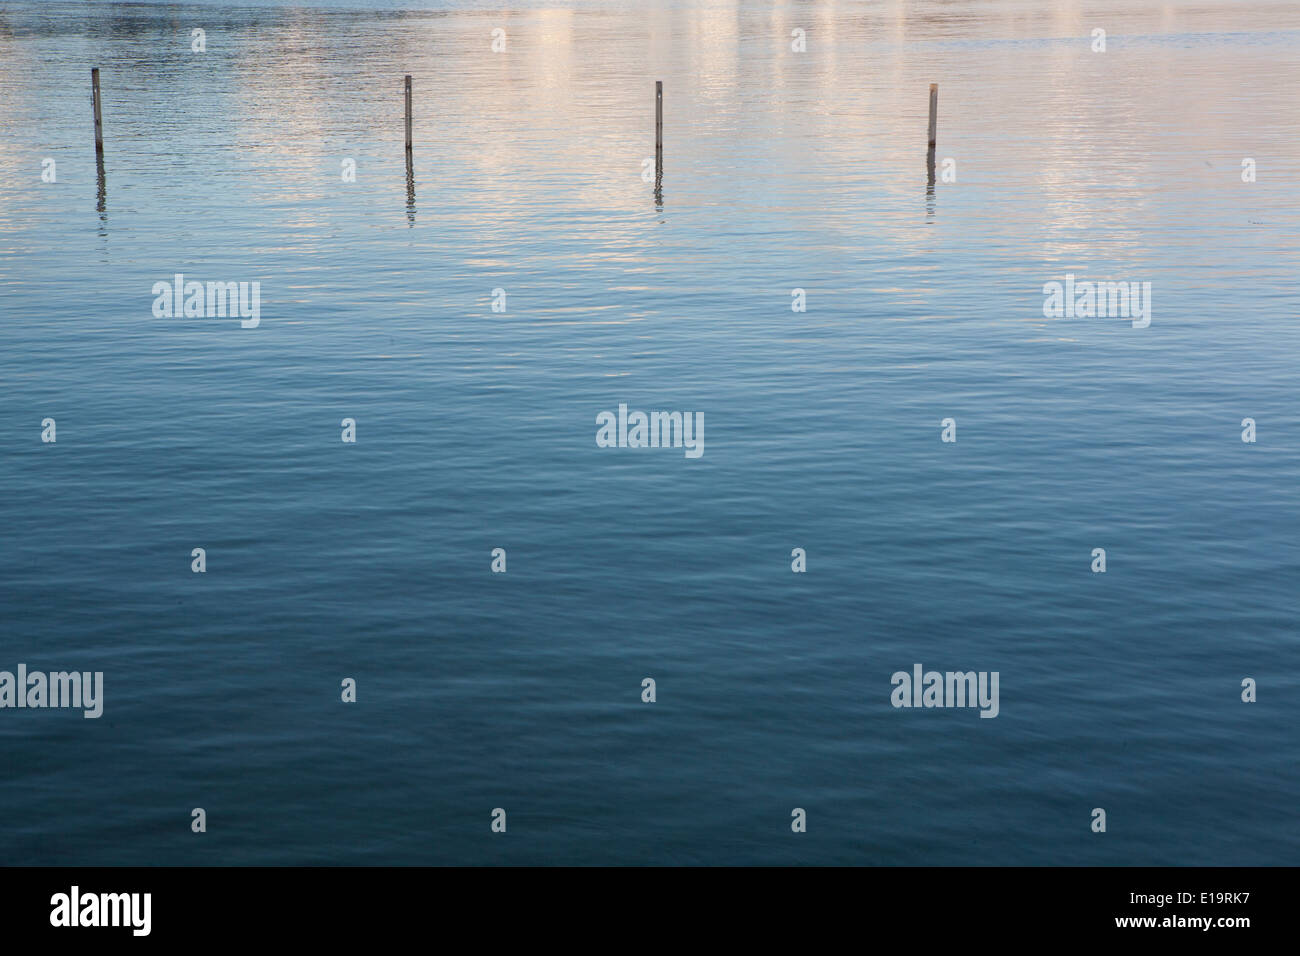 Reflections of the cloudy sky in the sea, four groynes are sticking out of the water. Stock Photo